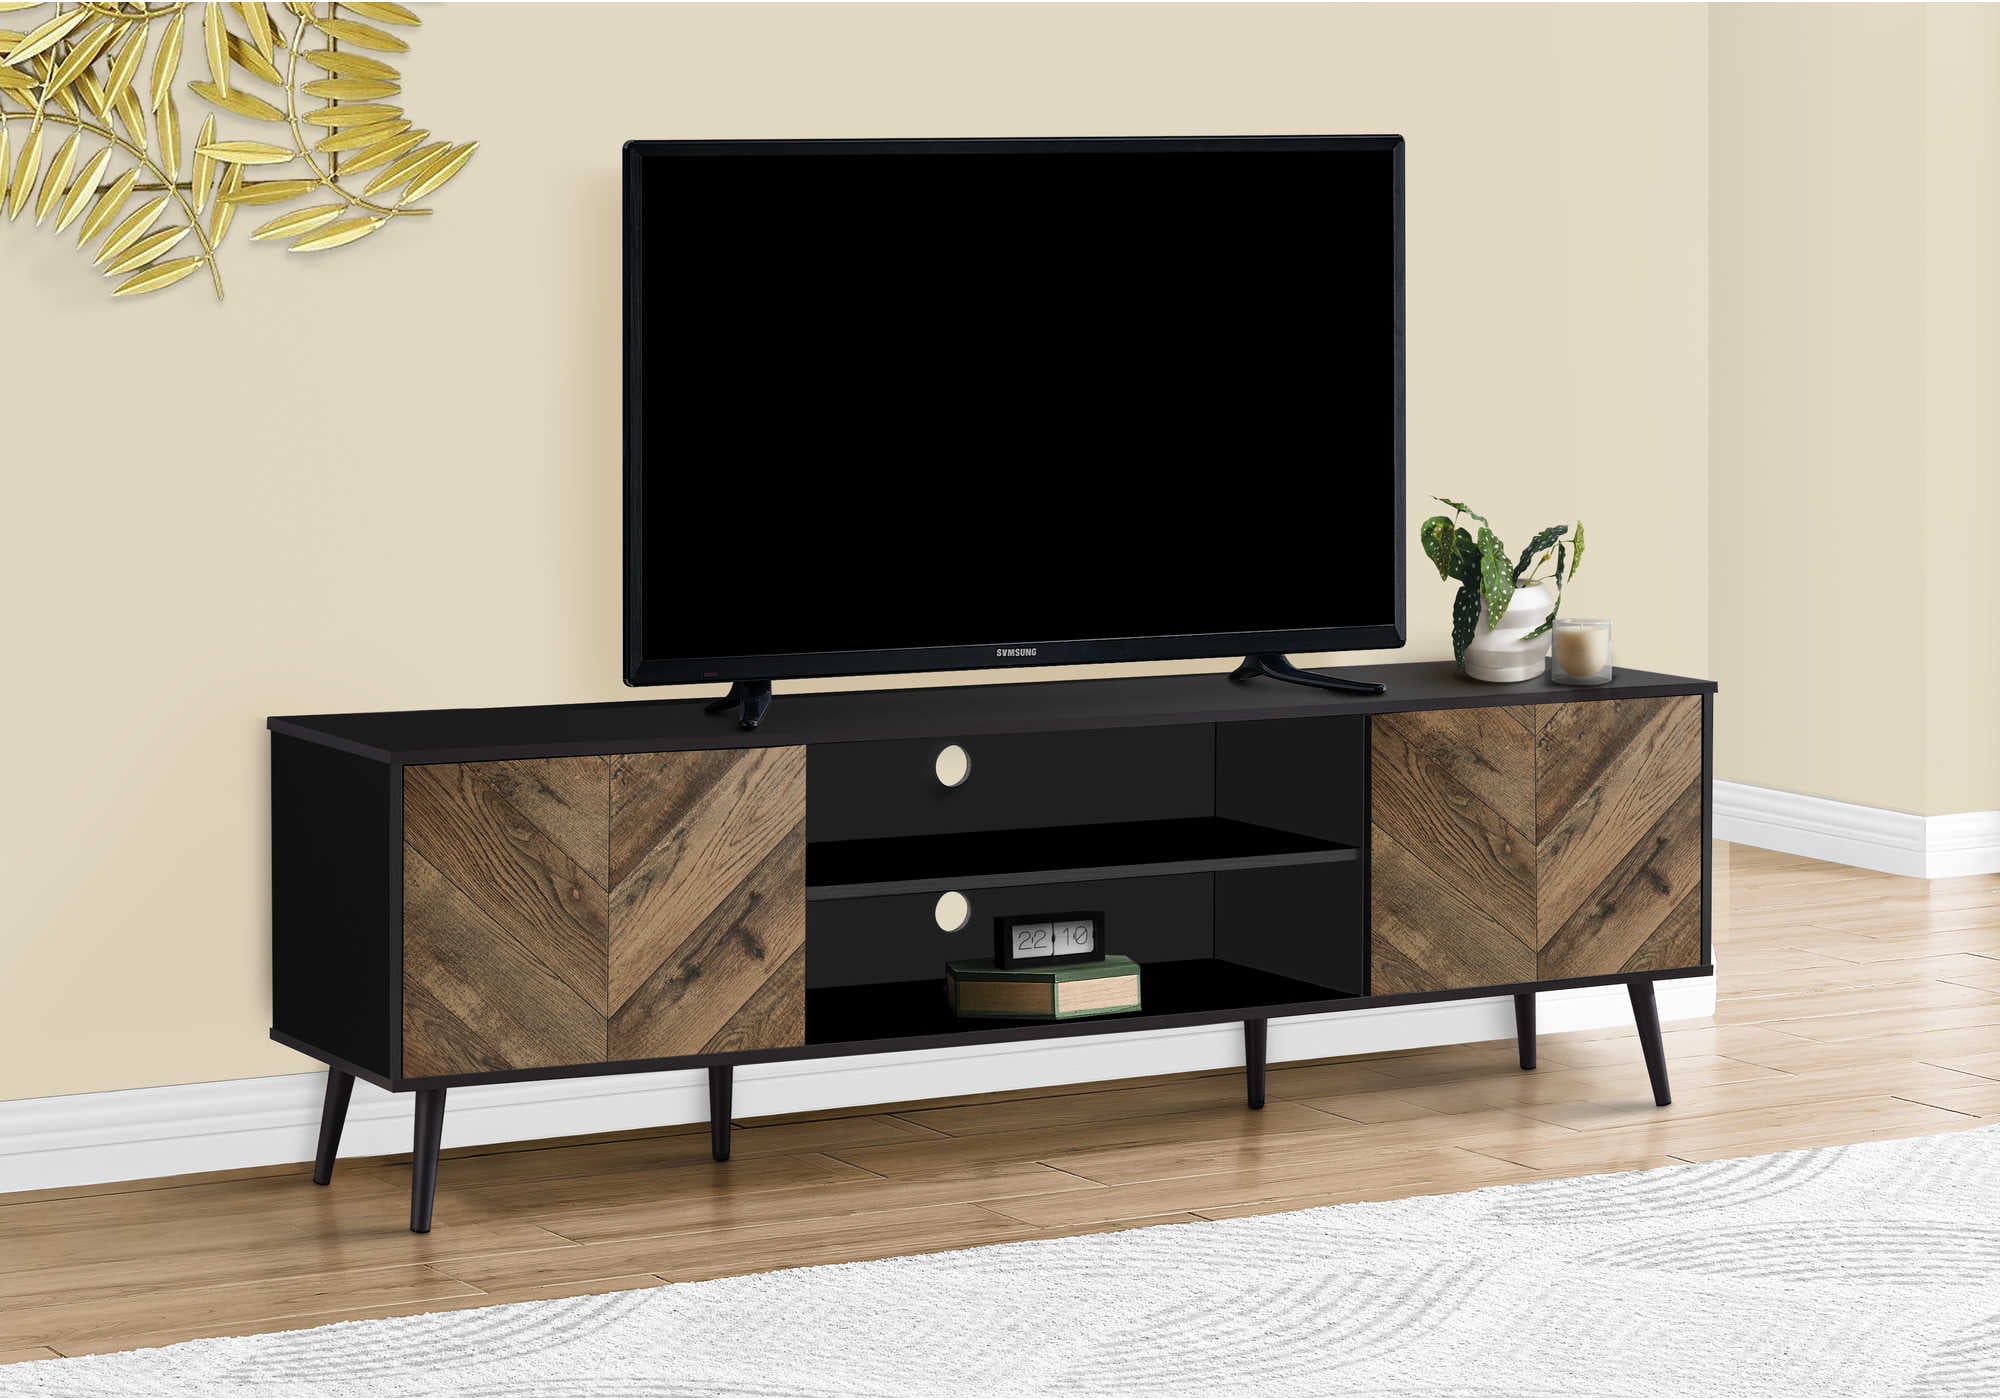 MN-122781    TV STAND - 72"L / BLACK WITH 2 WOOD-LOOK DOORS